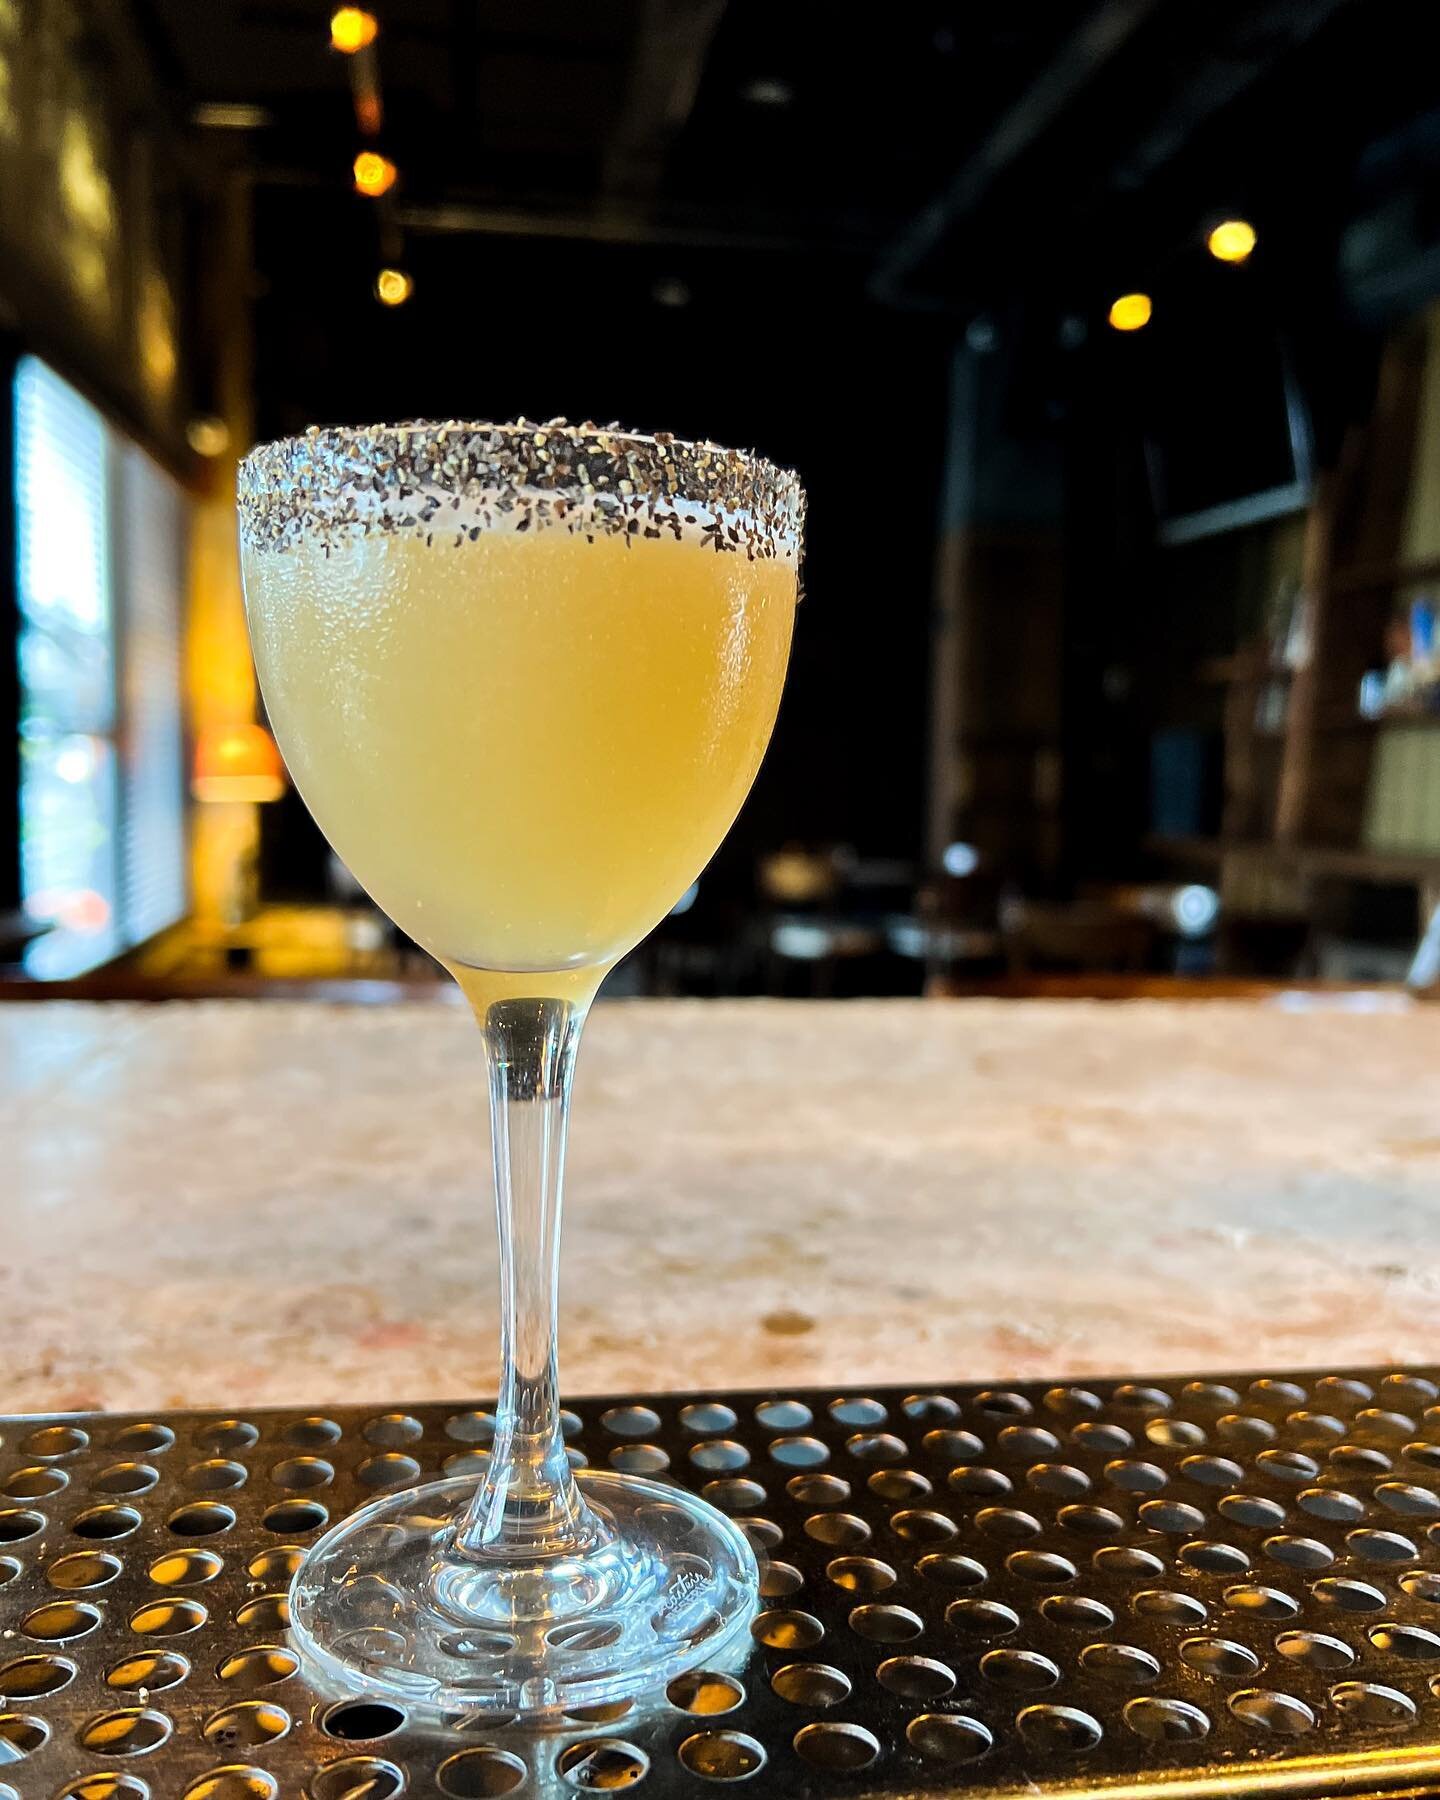 Come on down &amp; listen to live jazz and sip on our delicious new cocktail of the week:
&ldquo;El Numero 7&rdquo;
Siete Leguas A&ntilde;ejo Tequila
Ancho Reyes Chile Liqueur
Lulo &amp; Lime